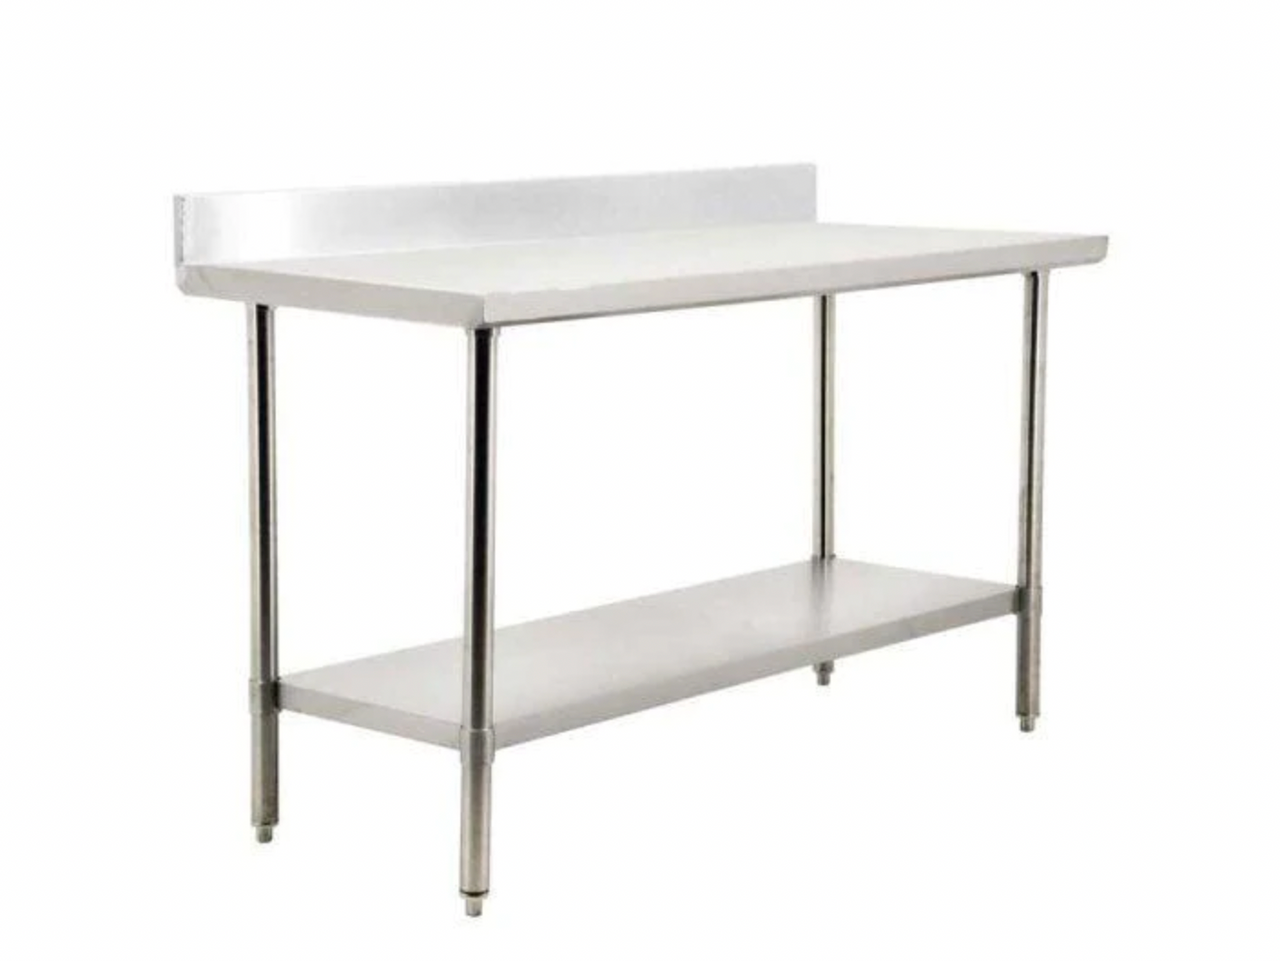 30" x 60" Stainless Steel Table With 4" Backsplash